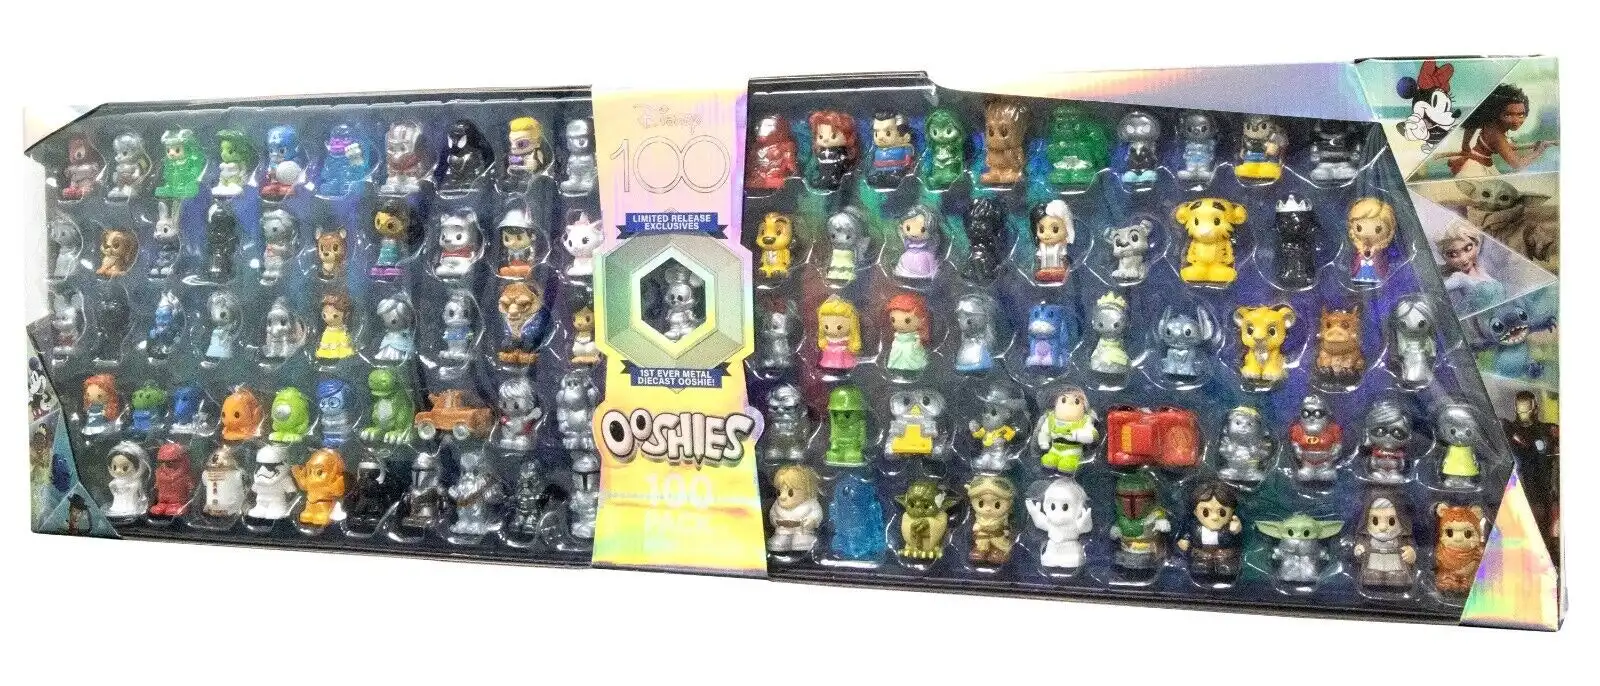 D100 Ooshies 100 Pack